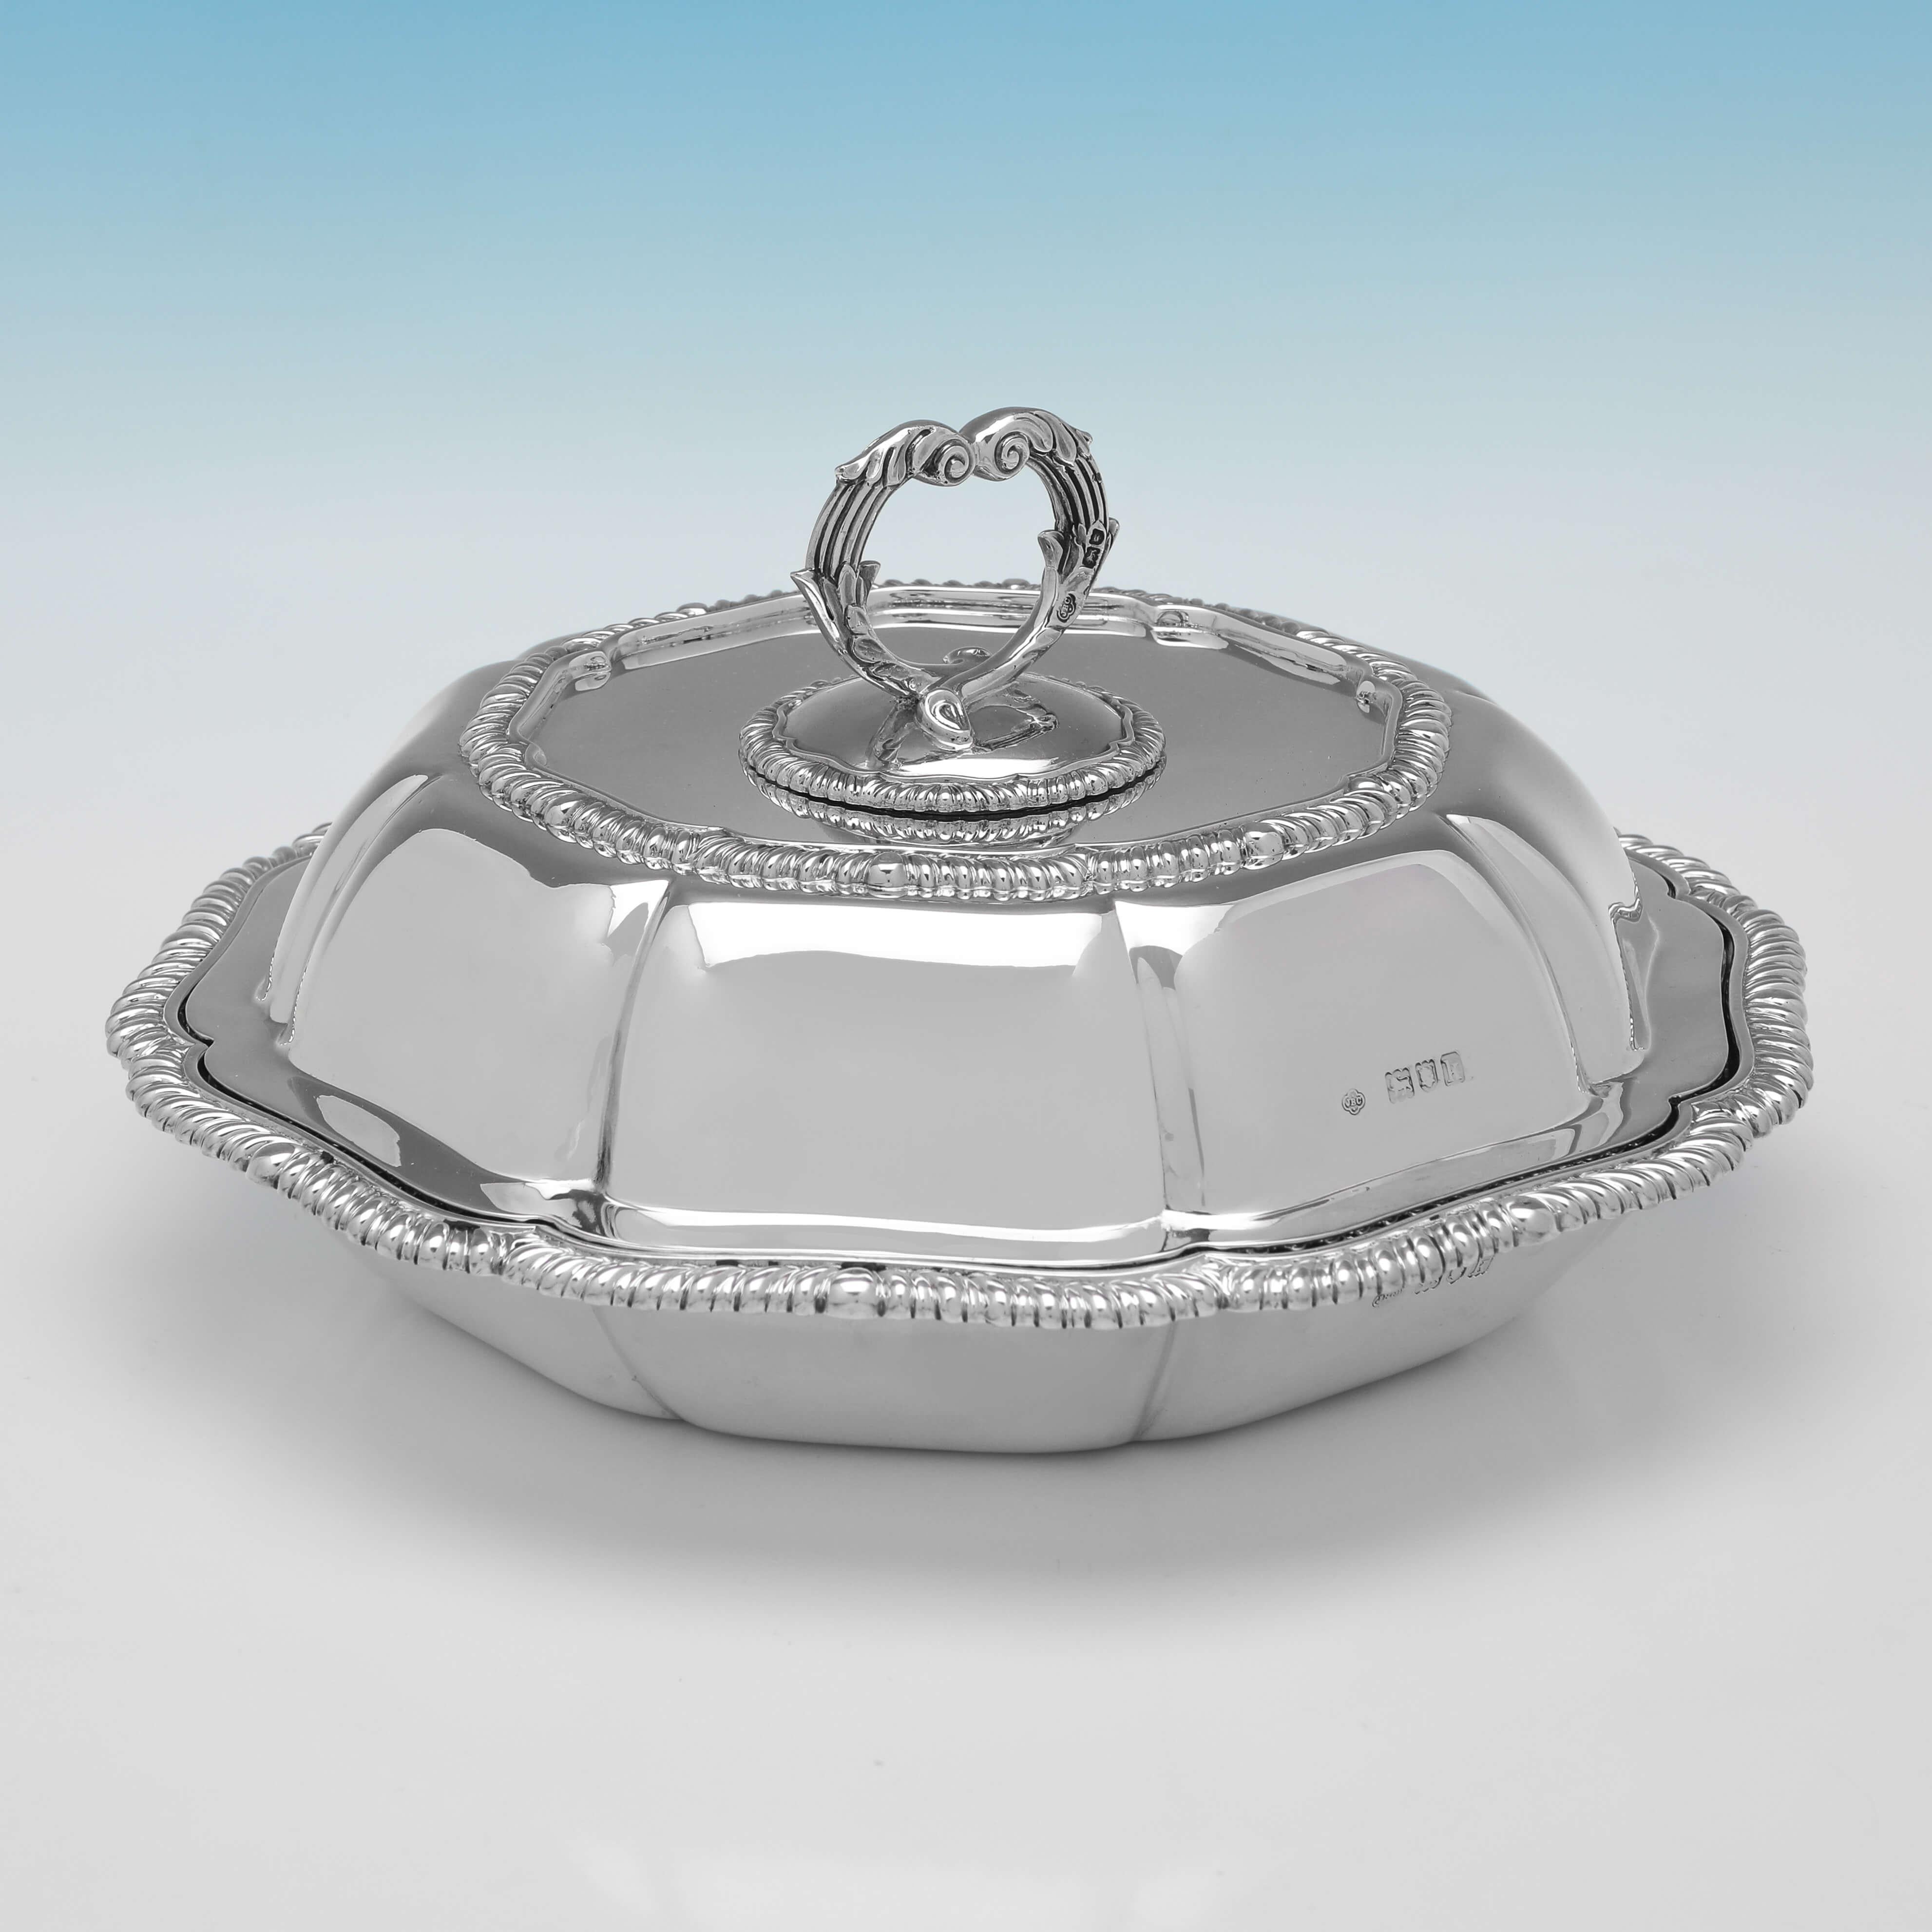 Hallmarked in London in 1905 by Carrington & Co., this charming pair of Edwardian, Antique Sterling Silver Entree Dishes, are octagonal in shape, and feature gadroon borders and removable handles. 

Each entree dish measures 3.75